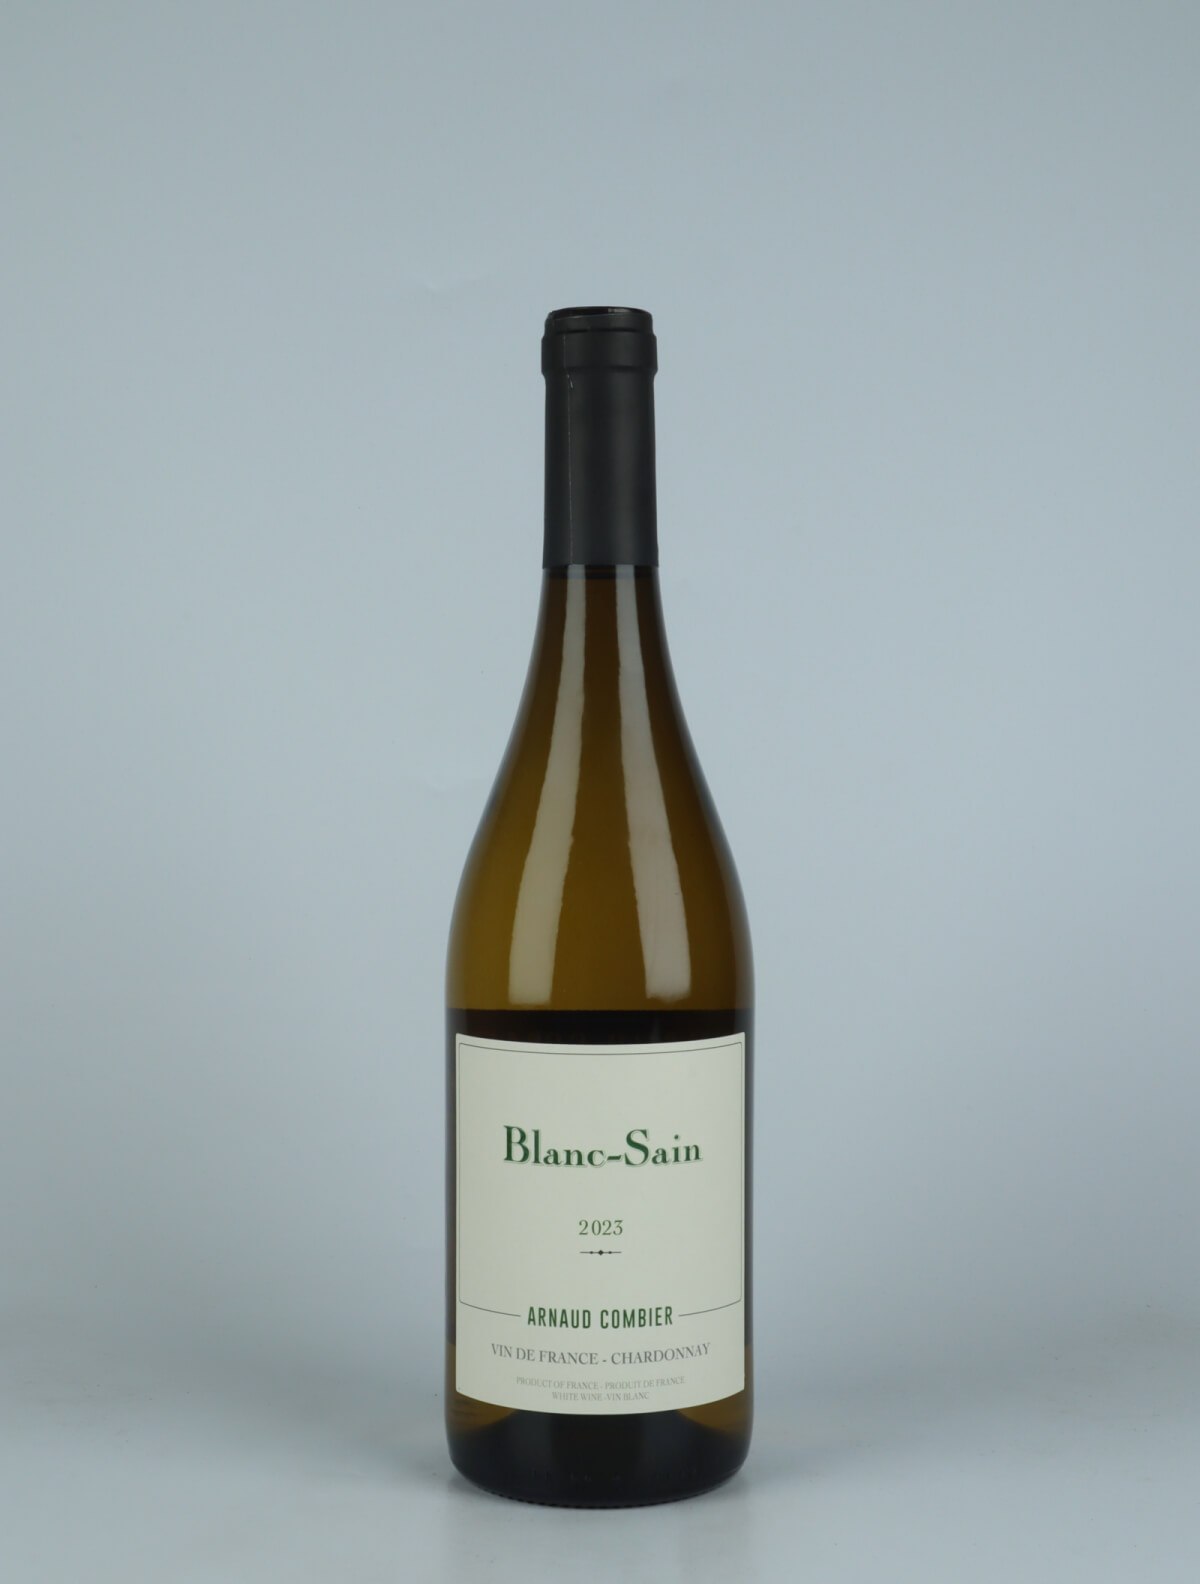 A bottle 2023 Blanc-Sain White wine from Arnaud Combier, Languedoc in France